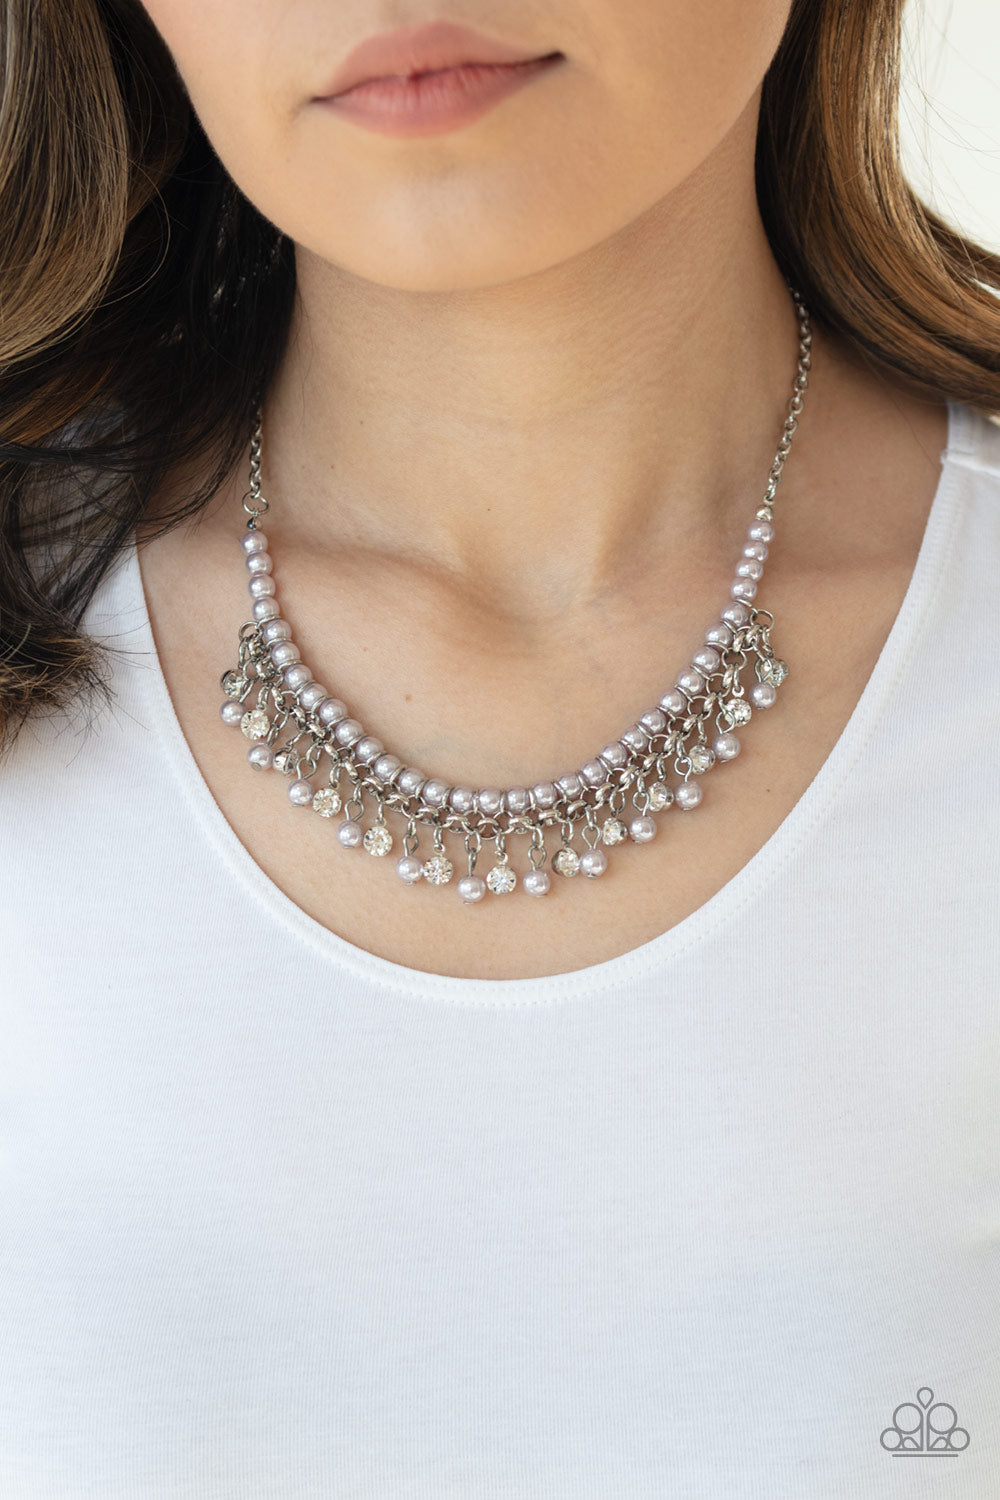 Paparazzi Necklace ~ A Touch of CLASSY - Silver